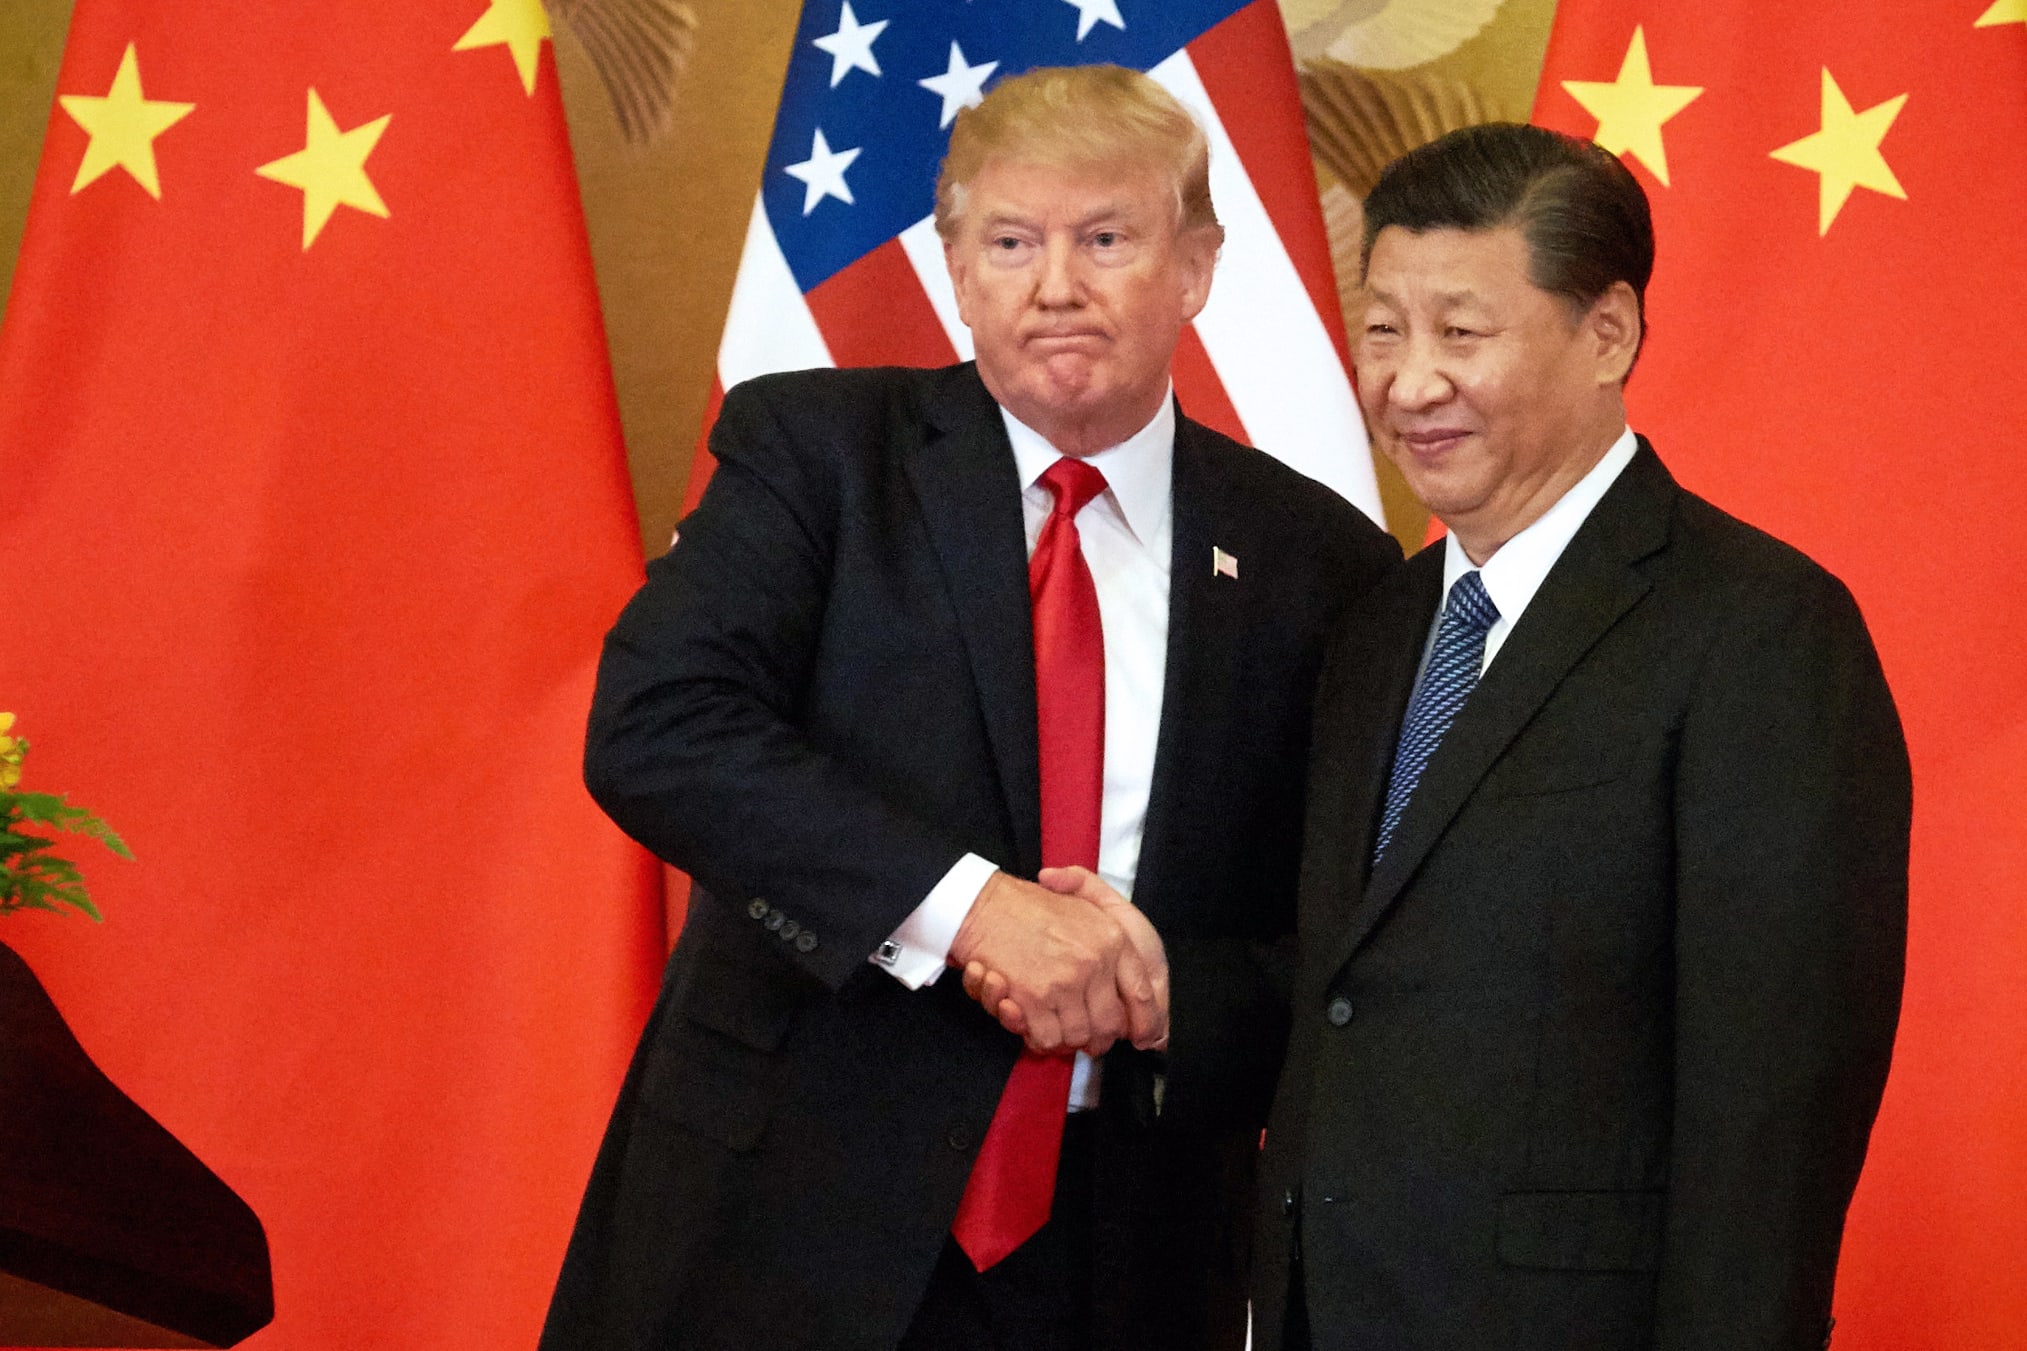 Trump's order for US firms to leave China will cost him